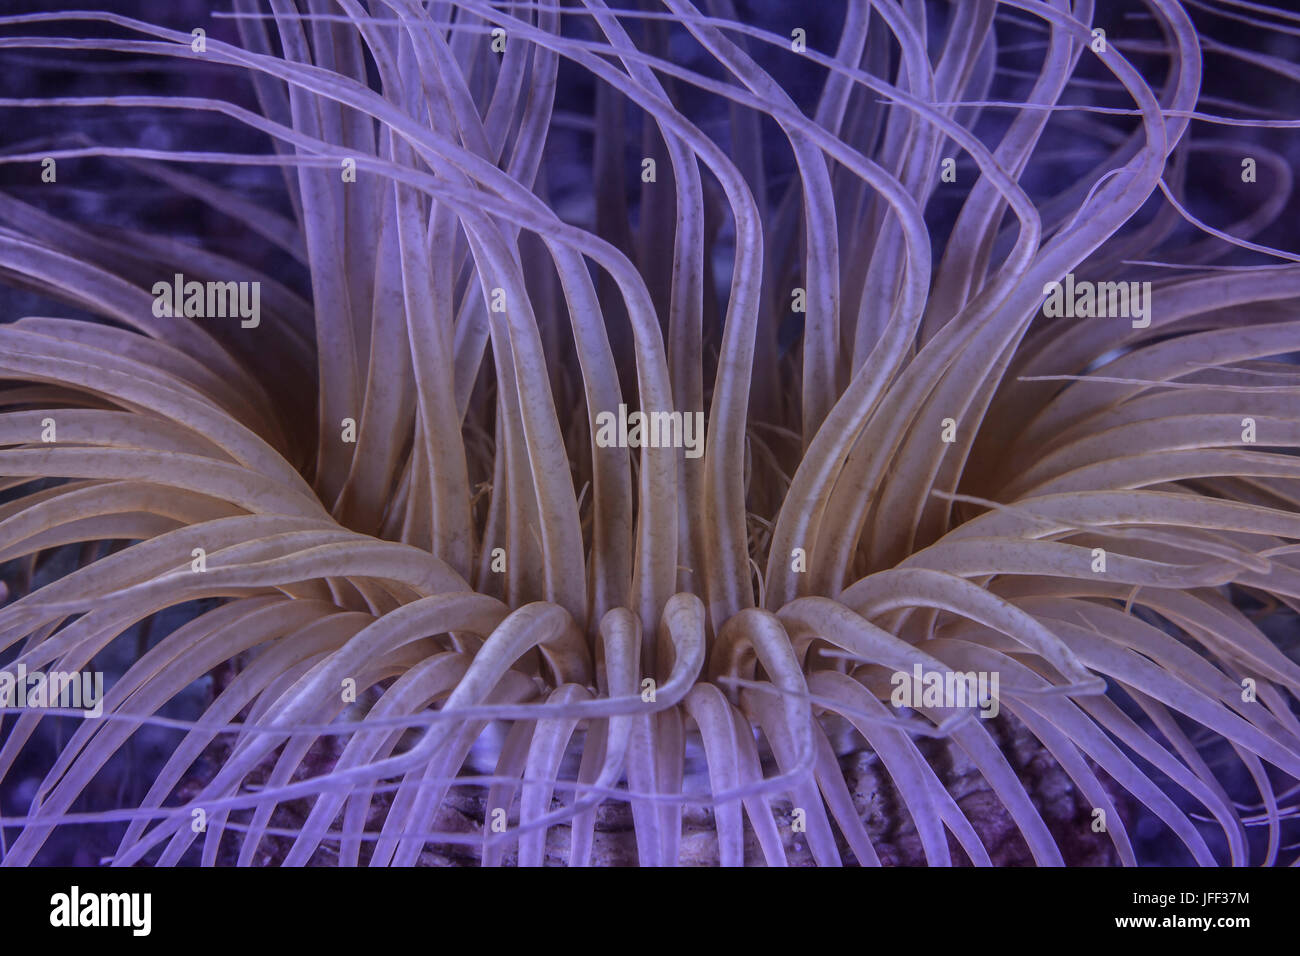 Close up image of fluorescent tentacles of a tube anemone. Lembeh Straits, Indonesia. Stock Photo